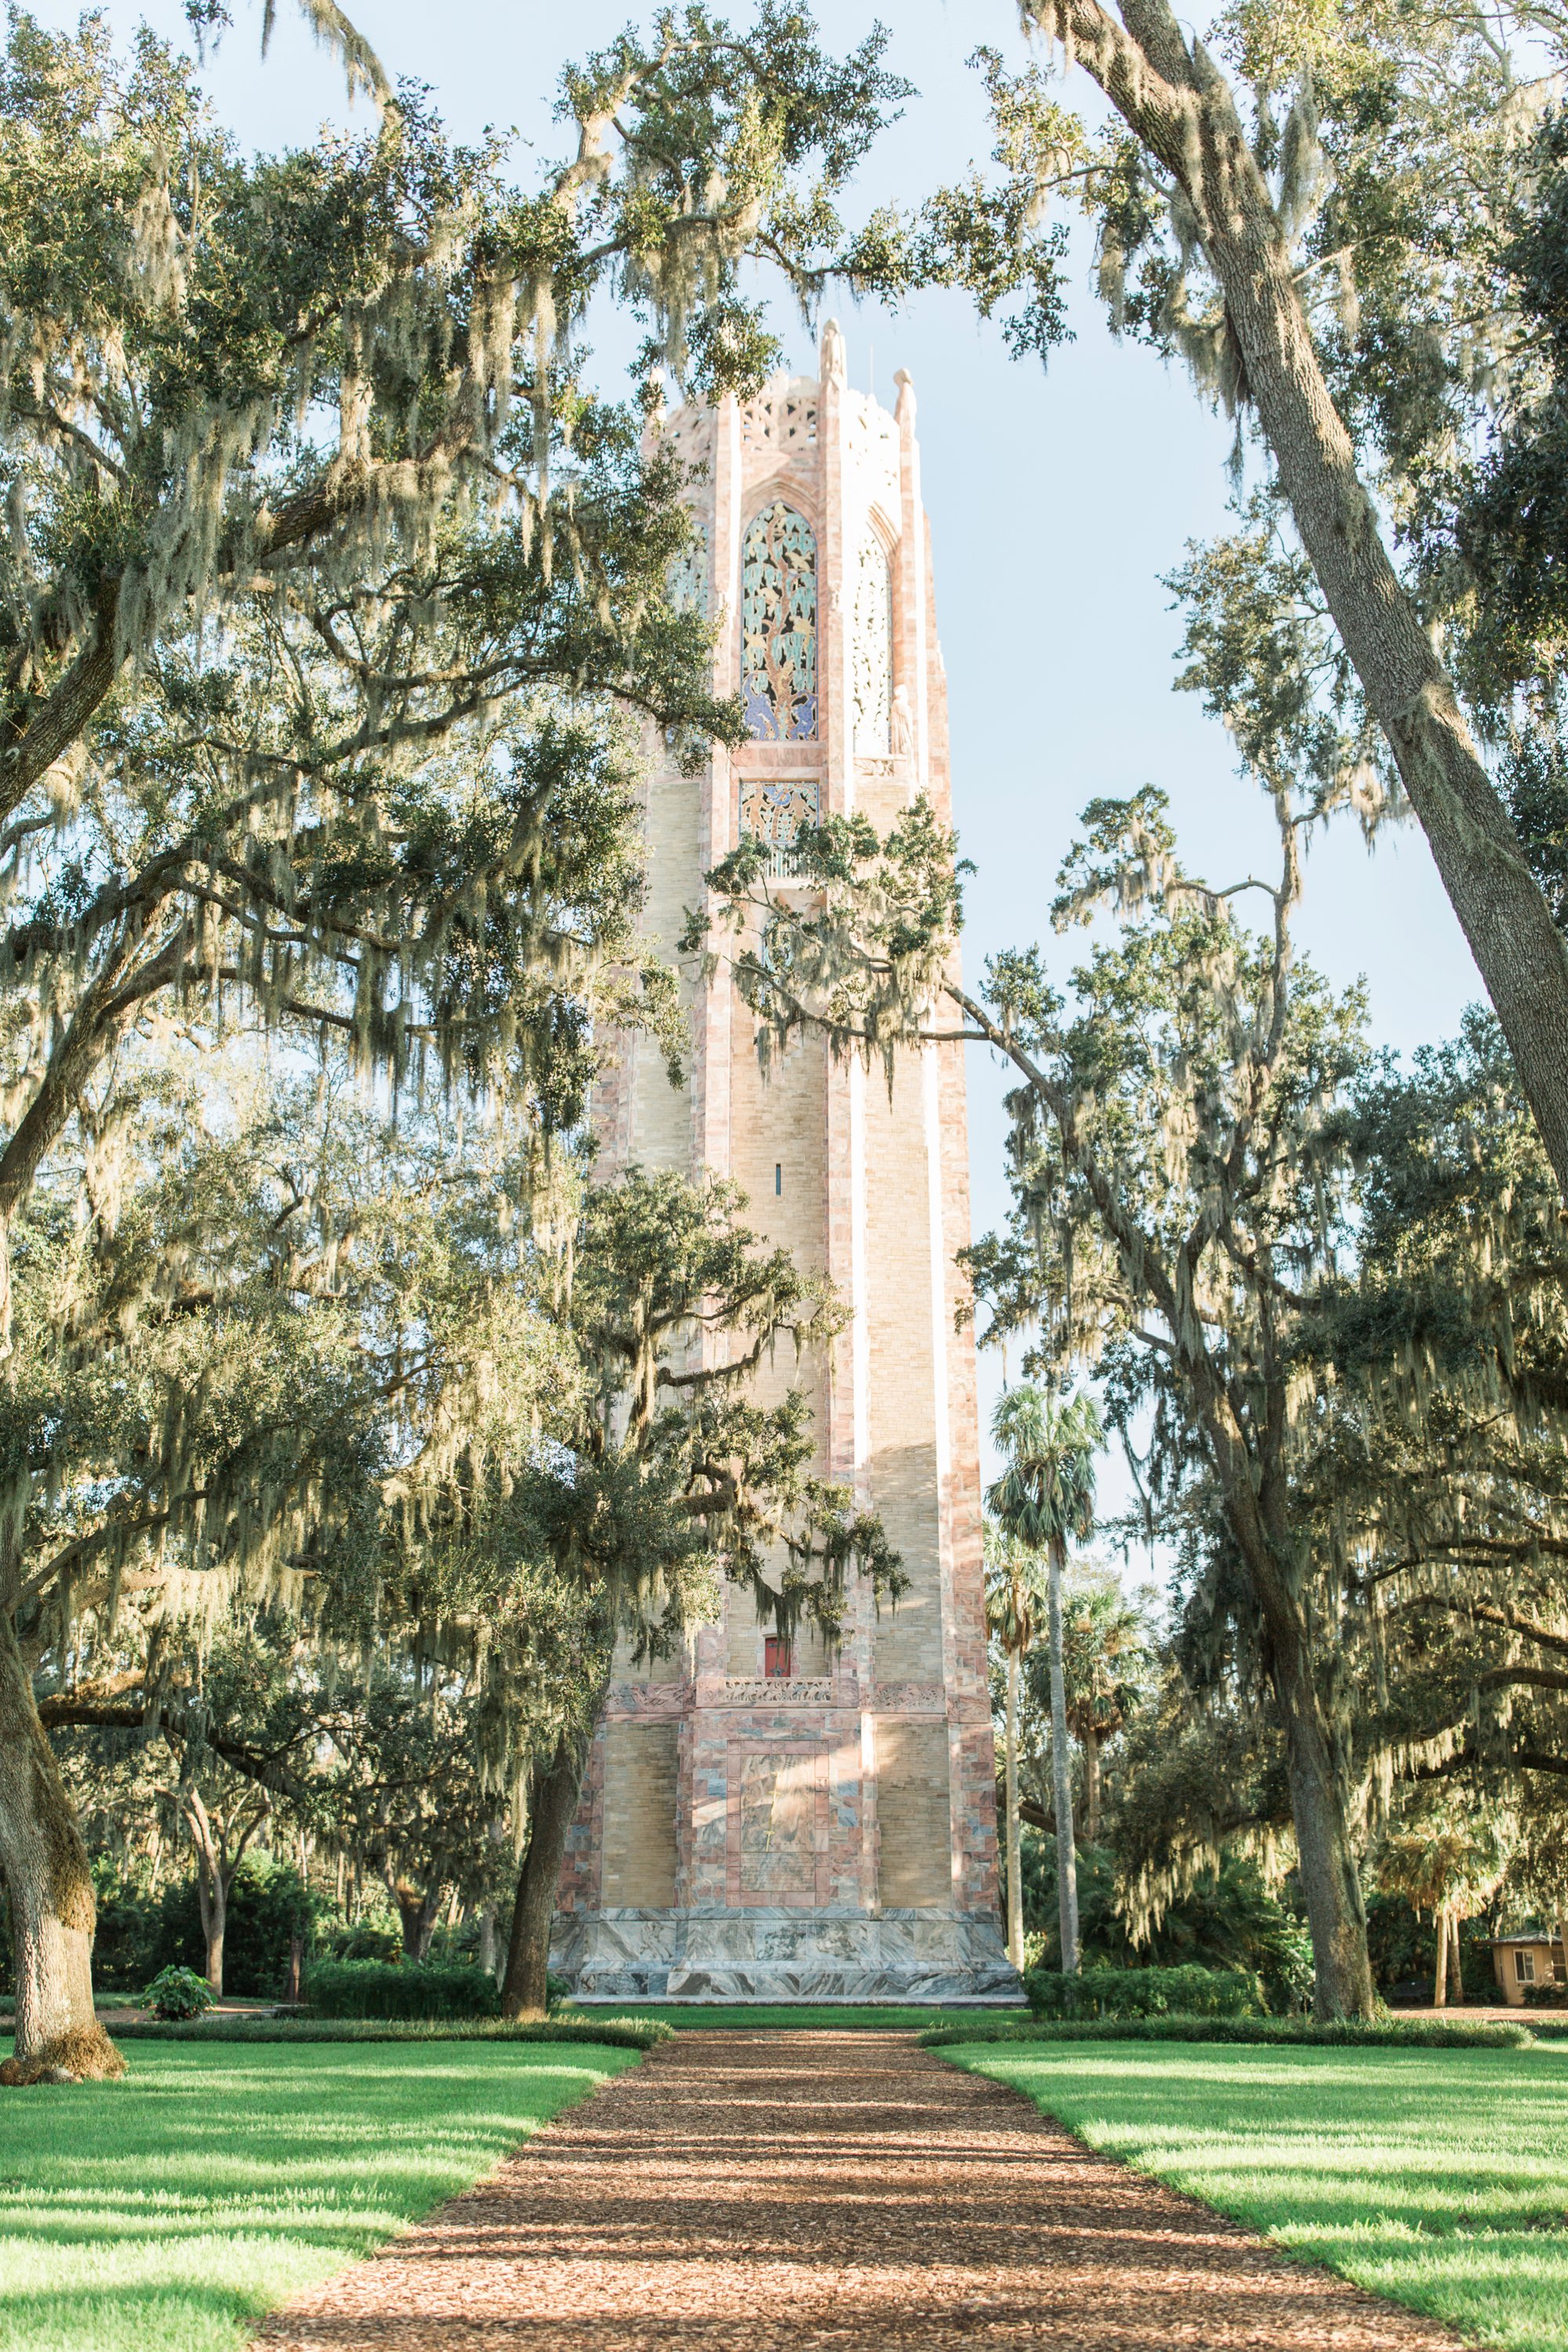 bok tower gardens engagement session, bok tower gardens, bok tower garden wedding